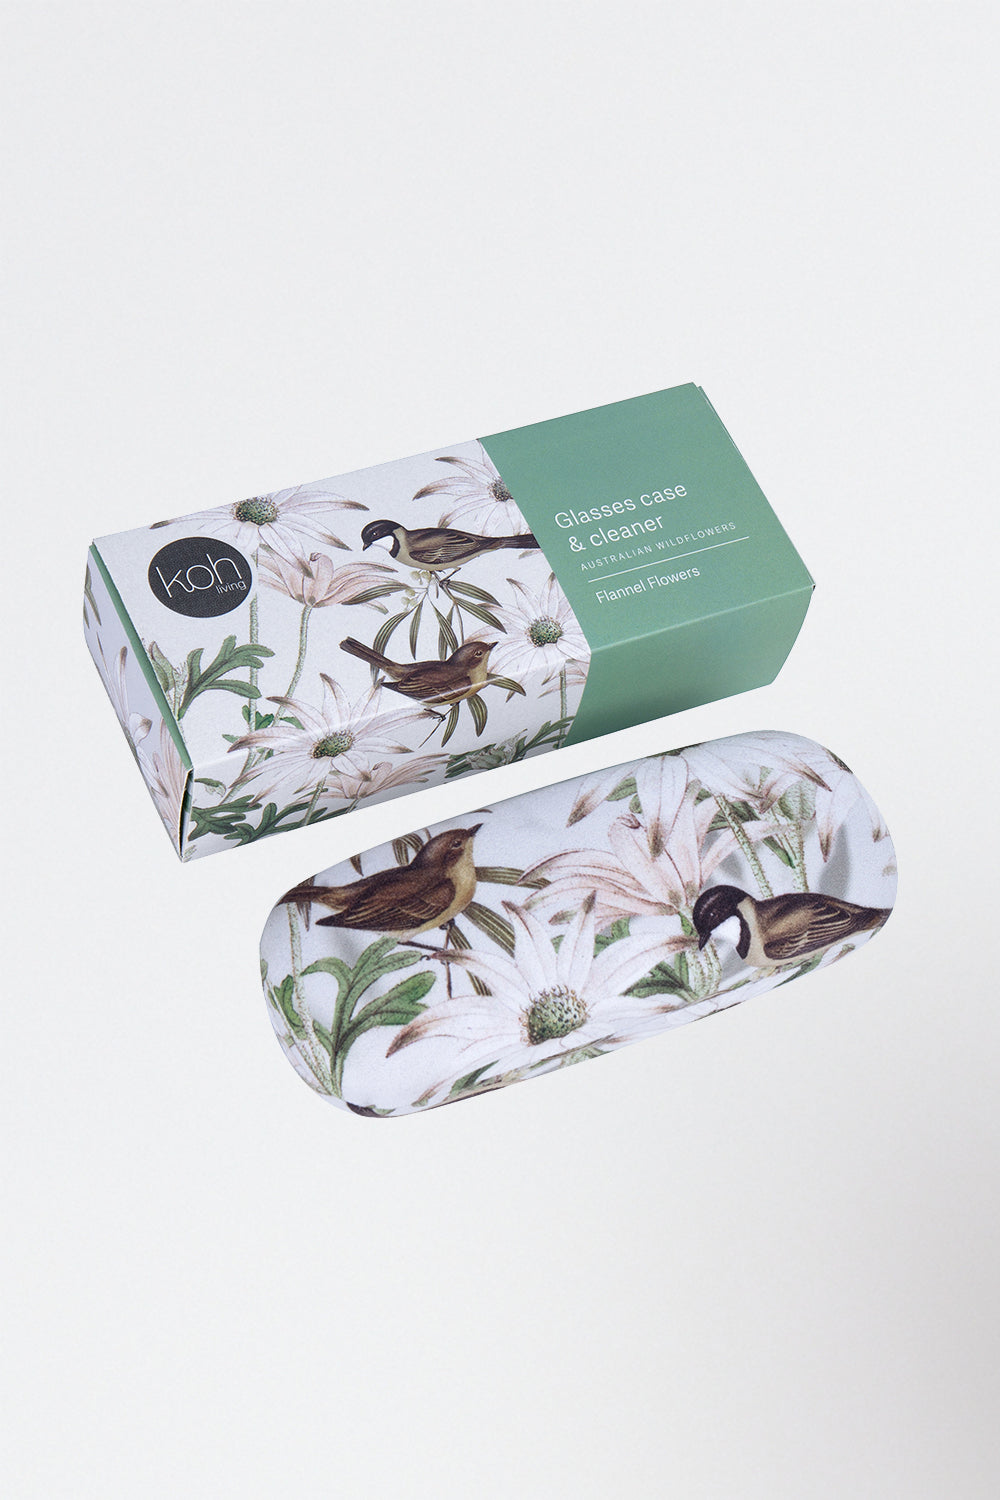 Flannel Flowers Glasses Case